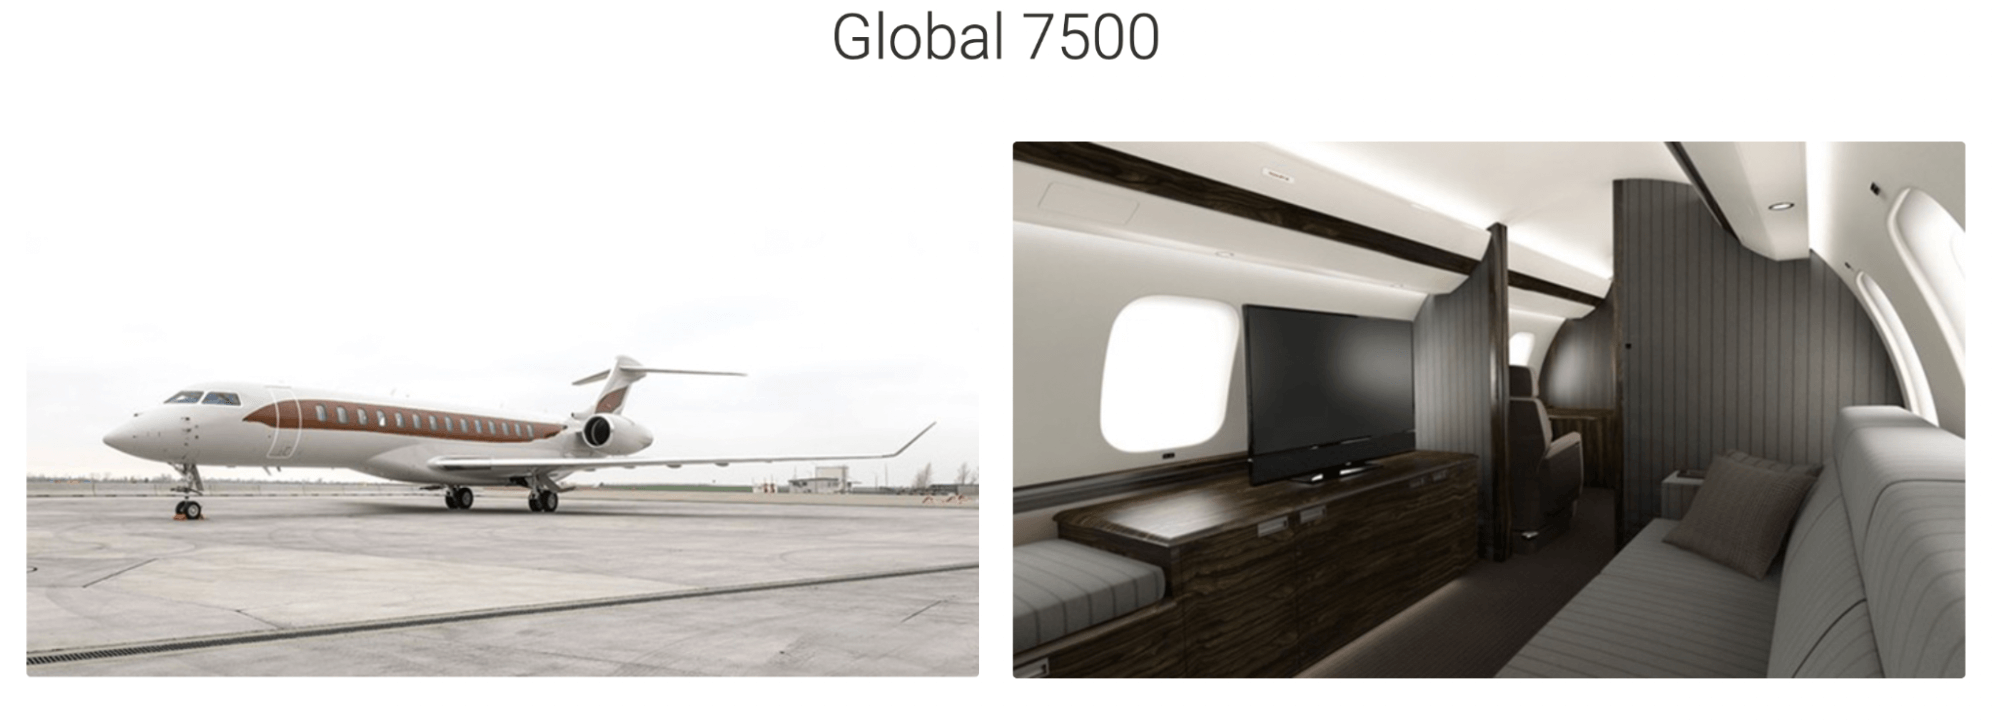 An exterior and interior picture of the business jet Global 7500.